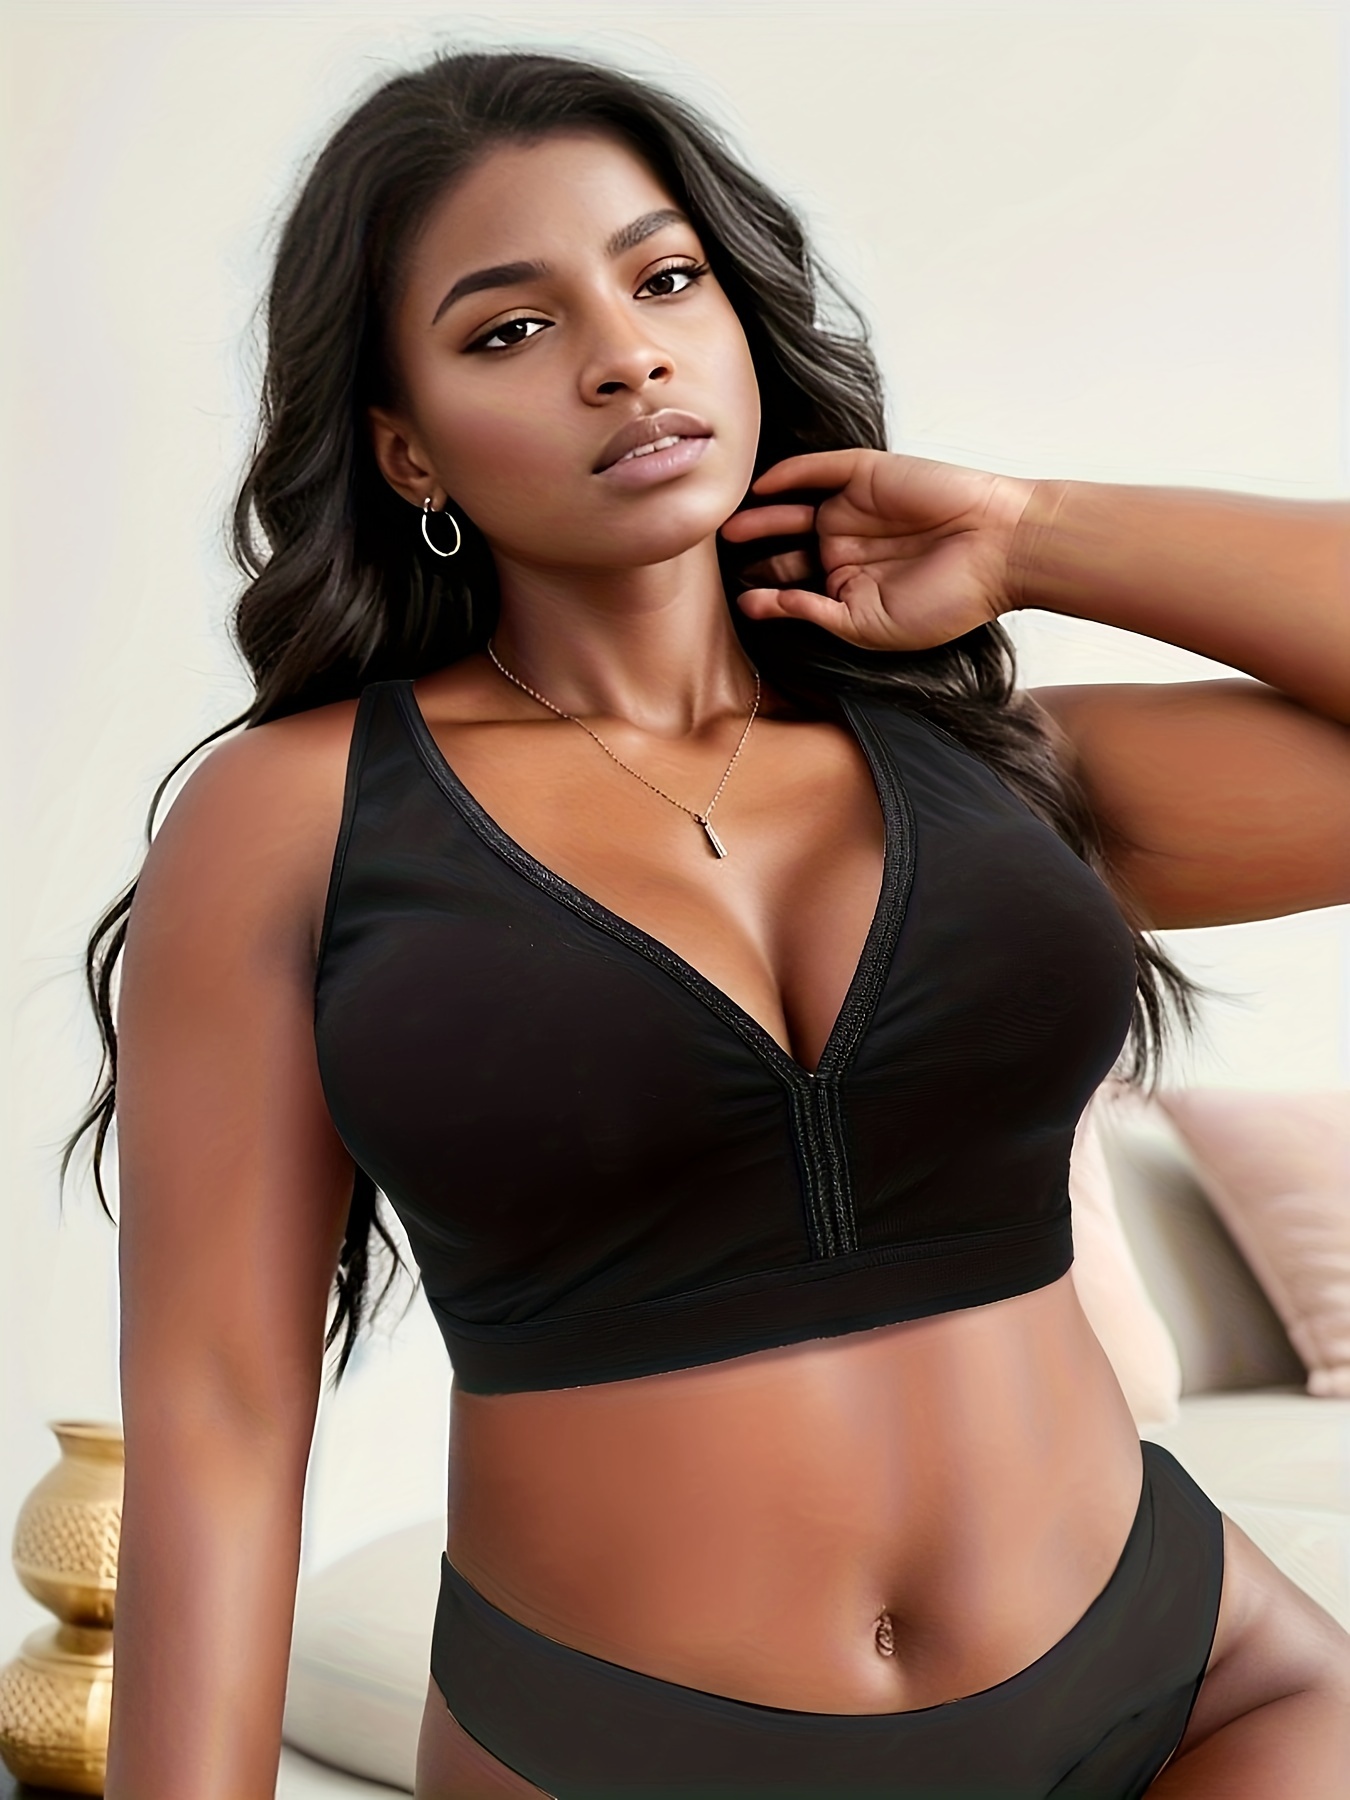 Plus Size Front Closure Bras For Women, Comfortable T-shirt Bra, Sexy Racer  Back Design, Ultra Soft And Lightweight, Women's Lingerie, Underwire